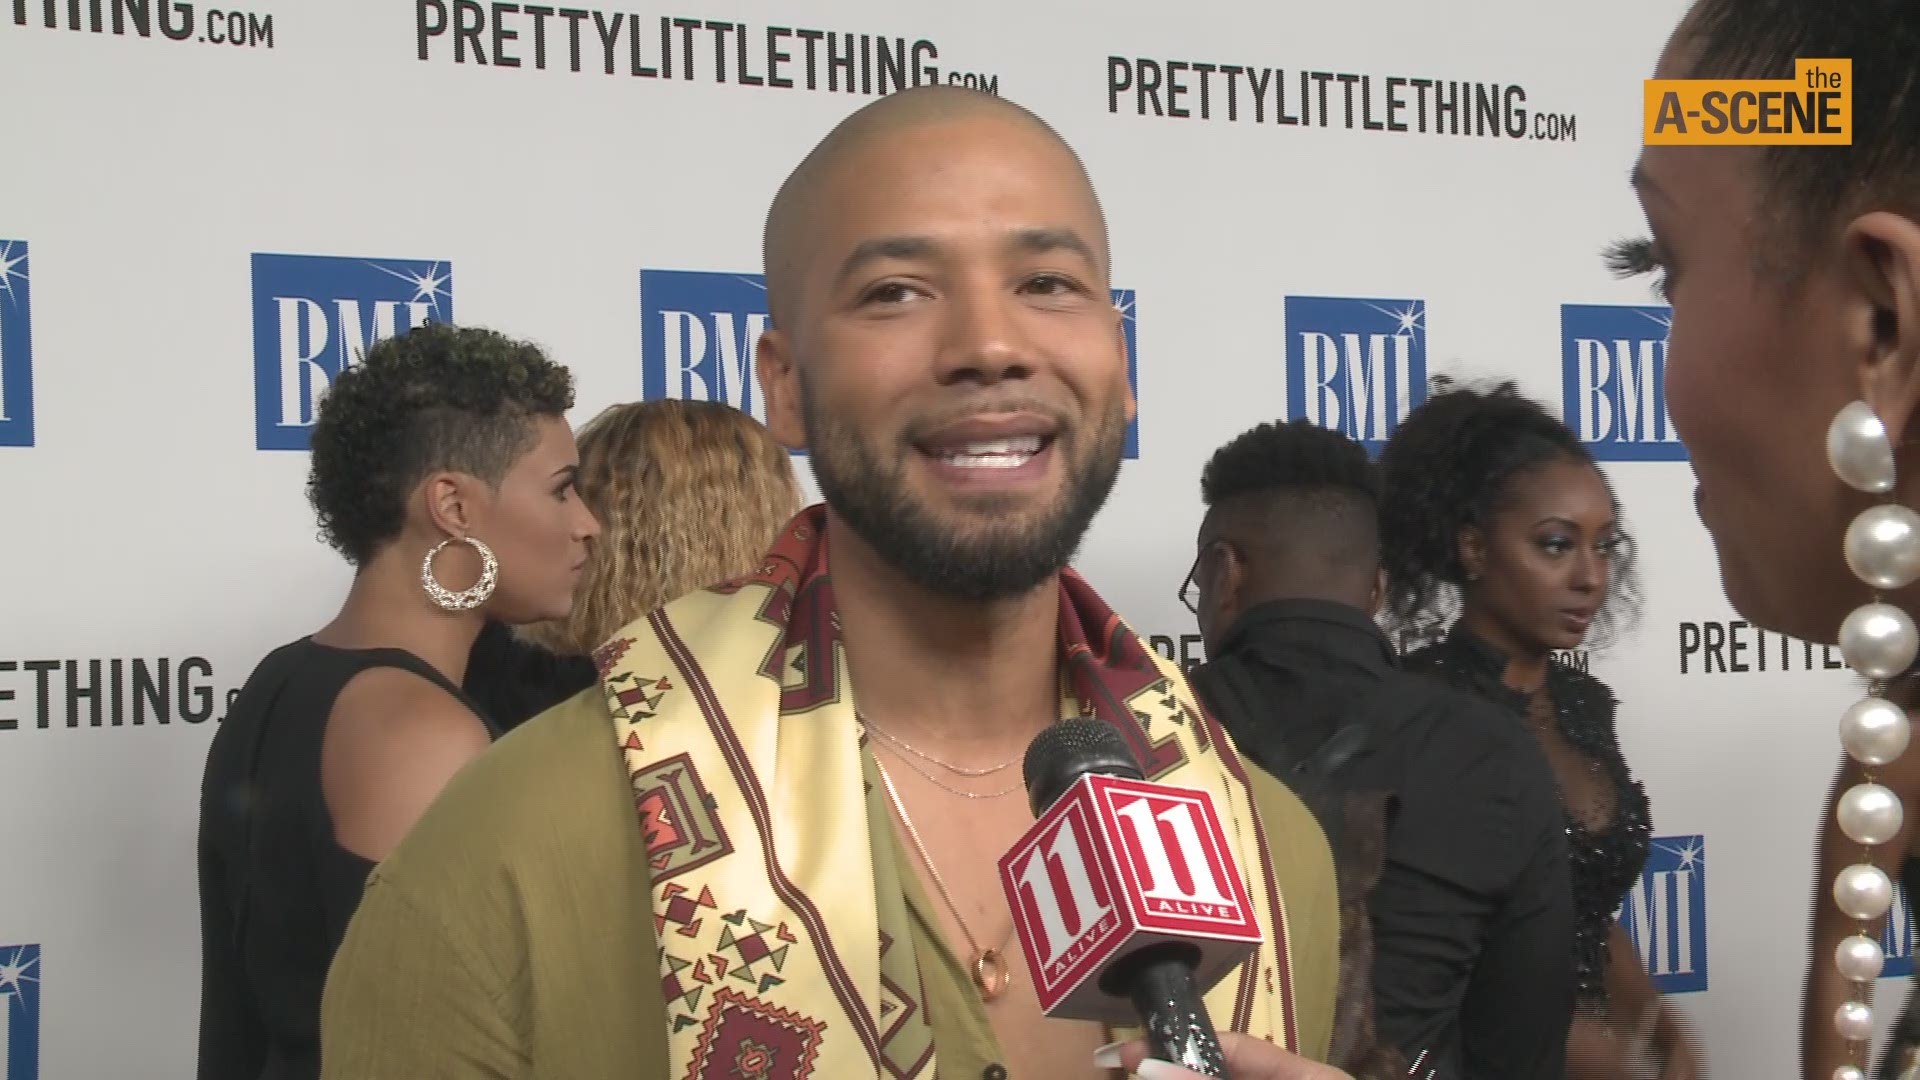 The A-Scene caught up with Empire star Jussie Smollett back in August before he performed a tribute to Janet Jackson at the BMI Awards.